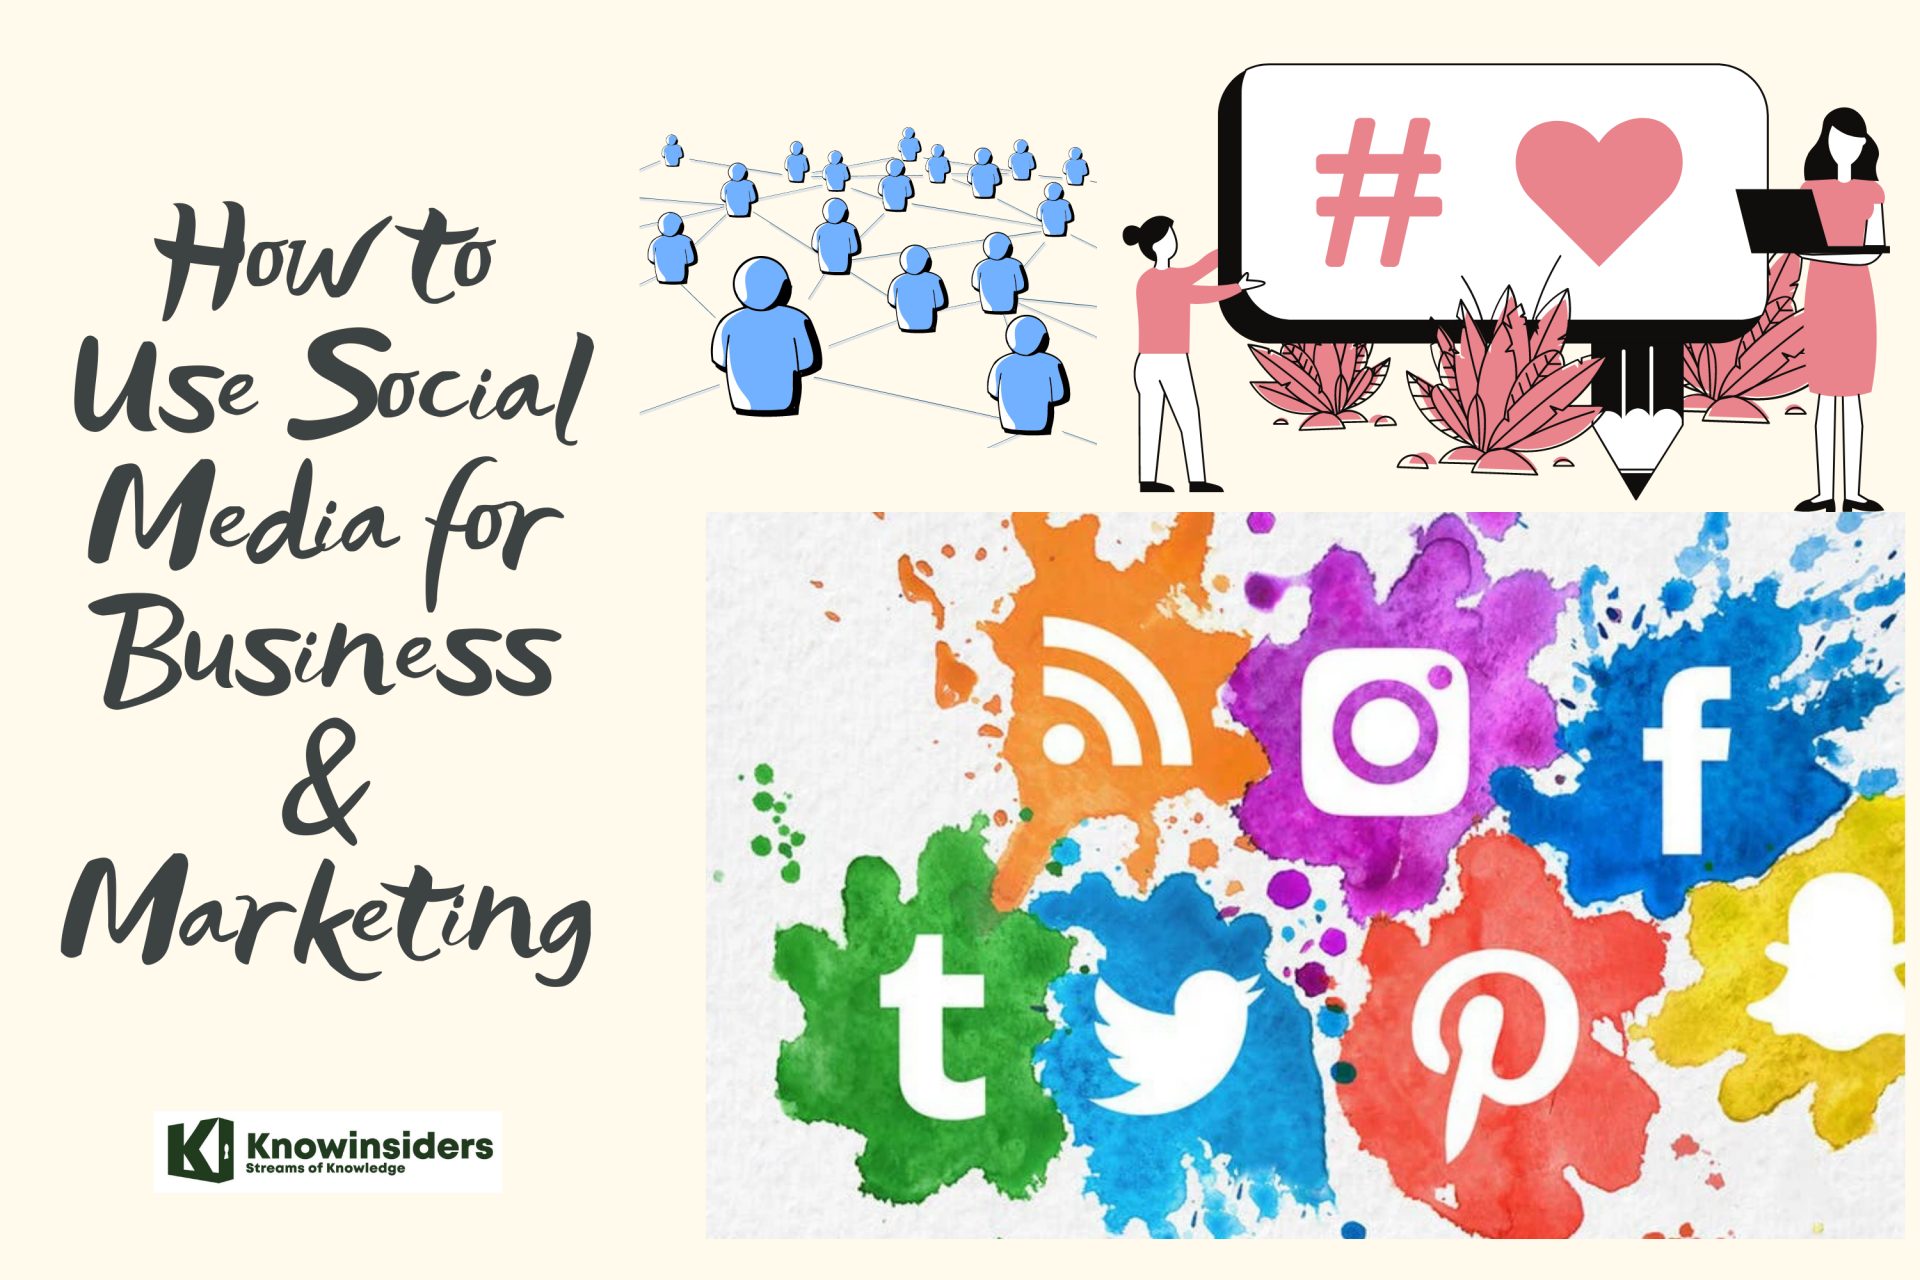 How to Use Social Media for Business & Marketing